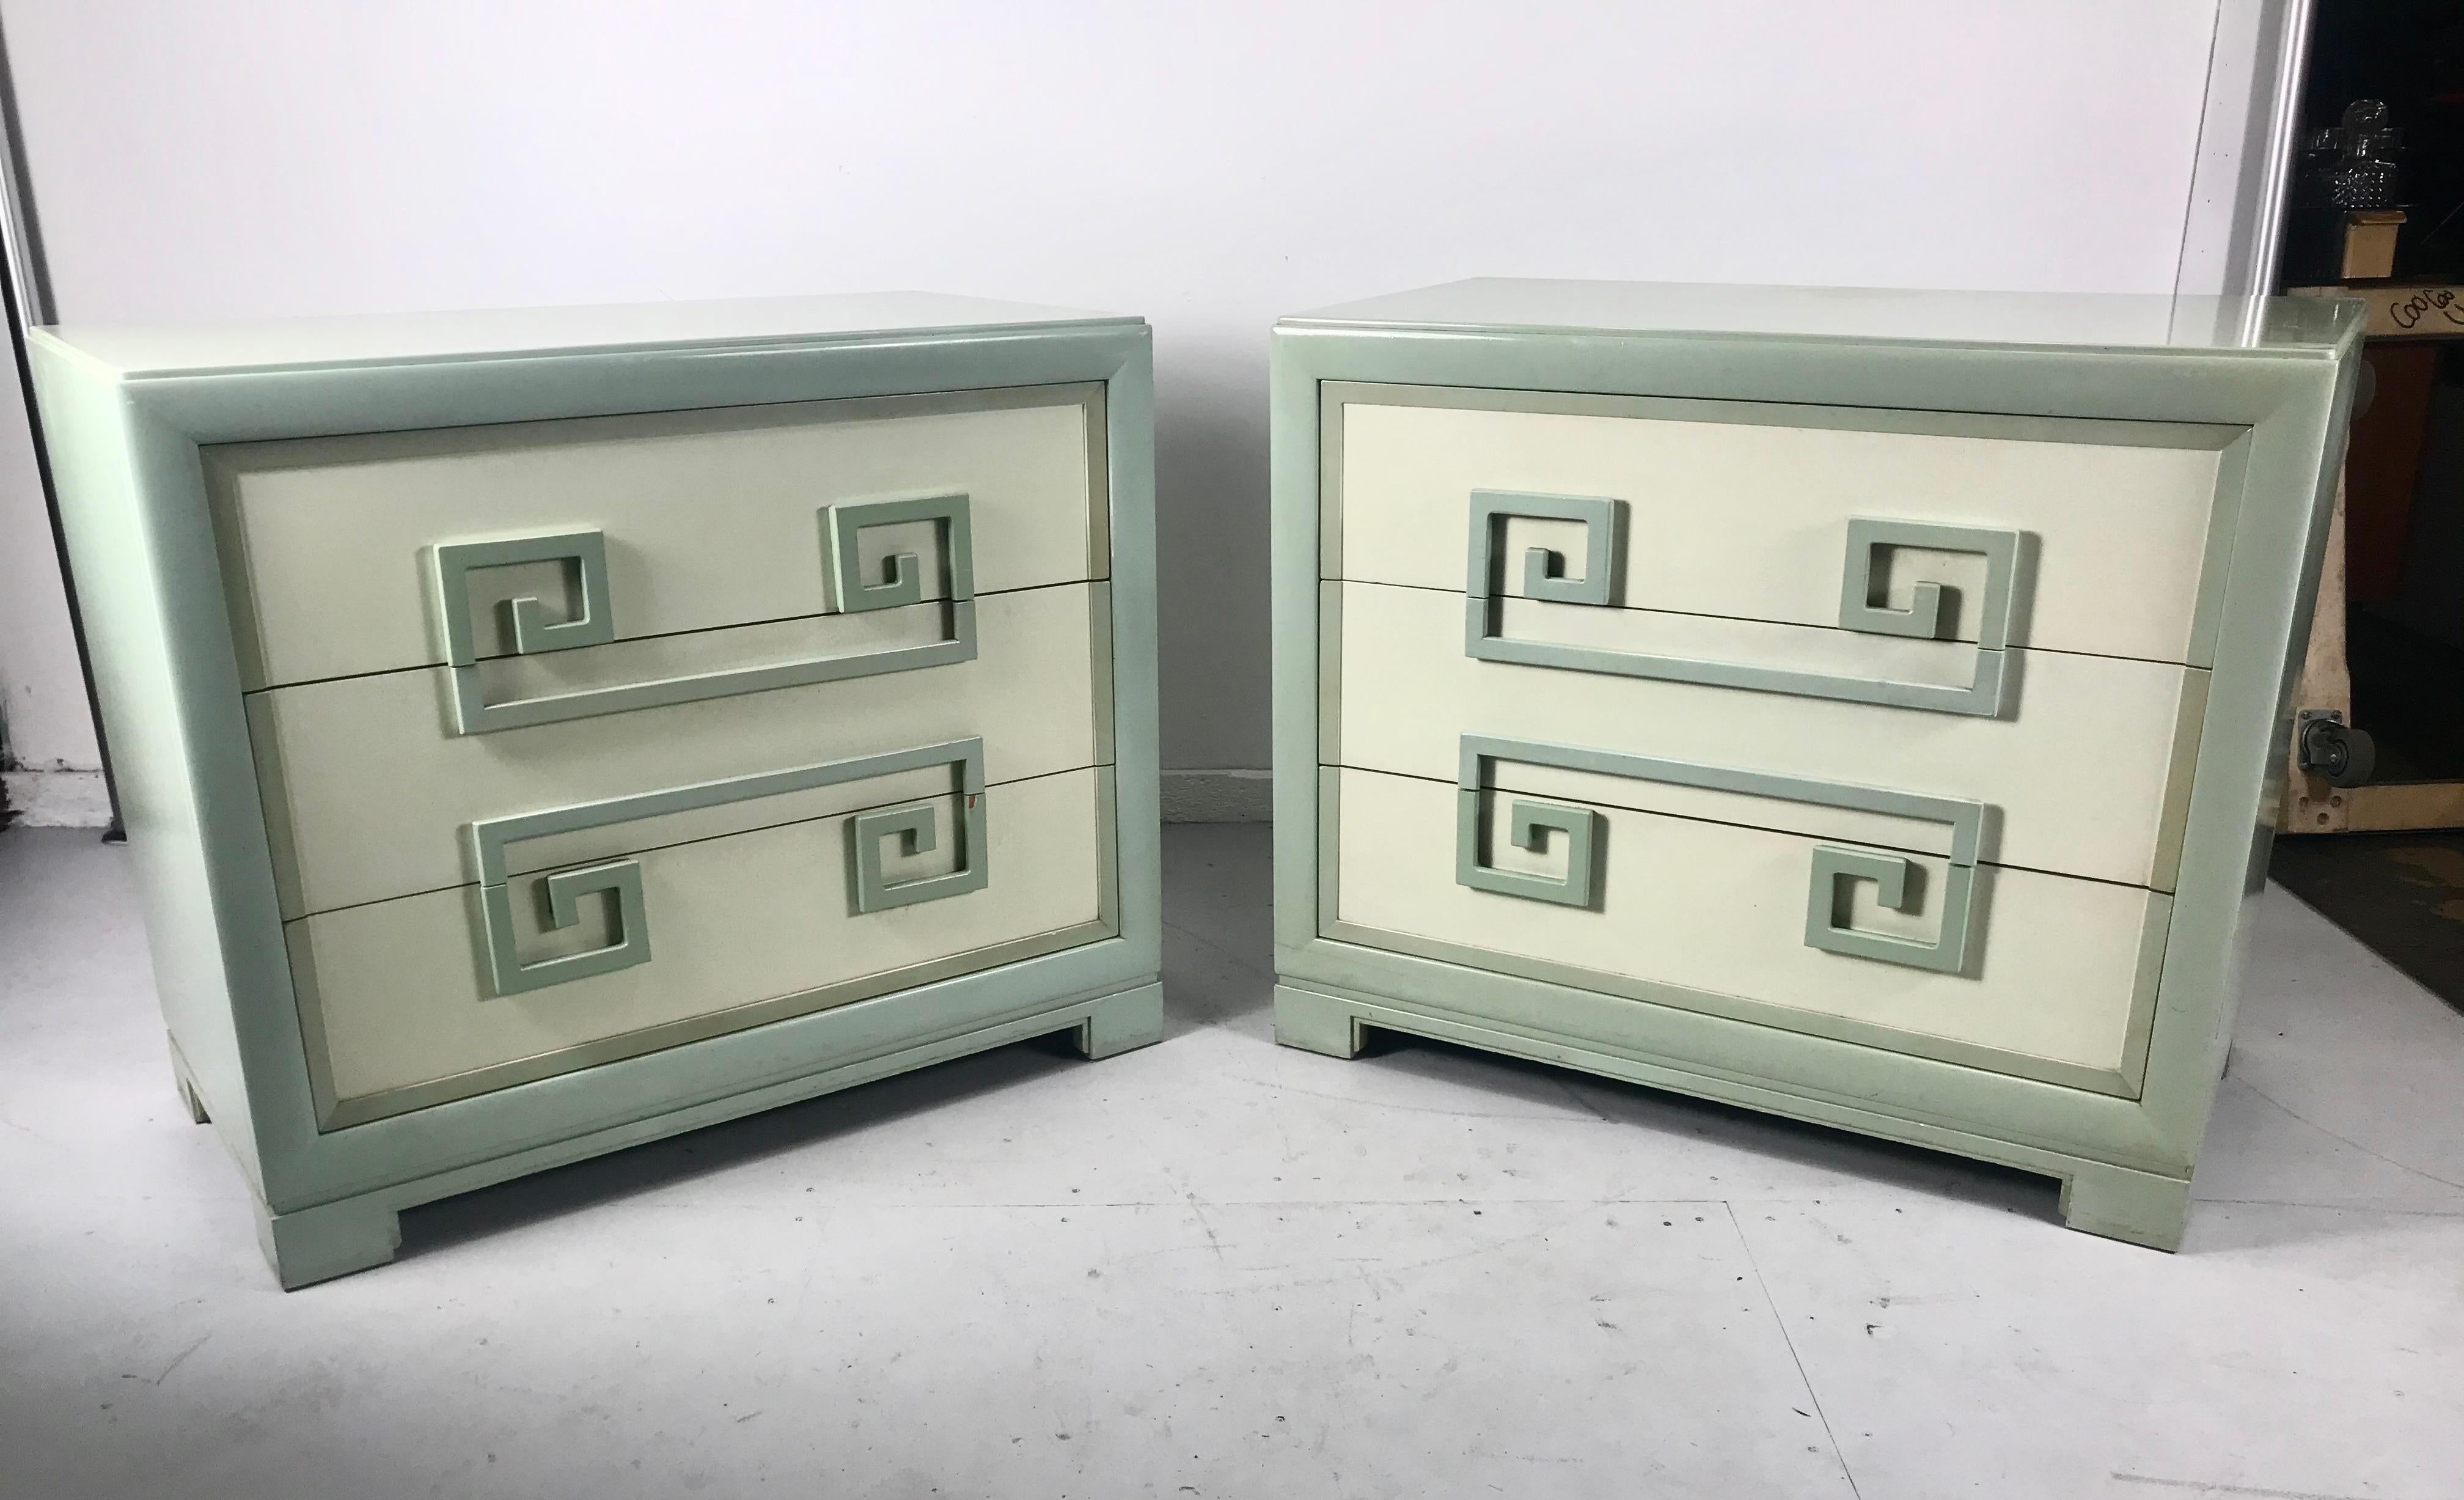 Fabulous pair of oversized chest of drawers/ dresser manufactured by Kittinger from their earliest Mandarin collection with bold Greek key drawer handles. Retains original two-tone lacquer finish in nice original condition. Minor paint / veneer